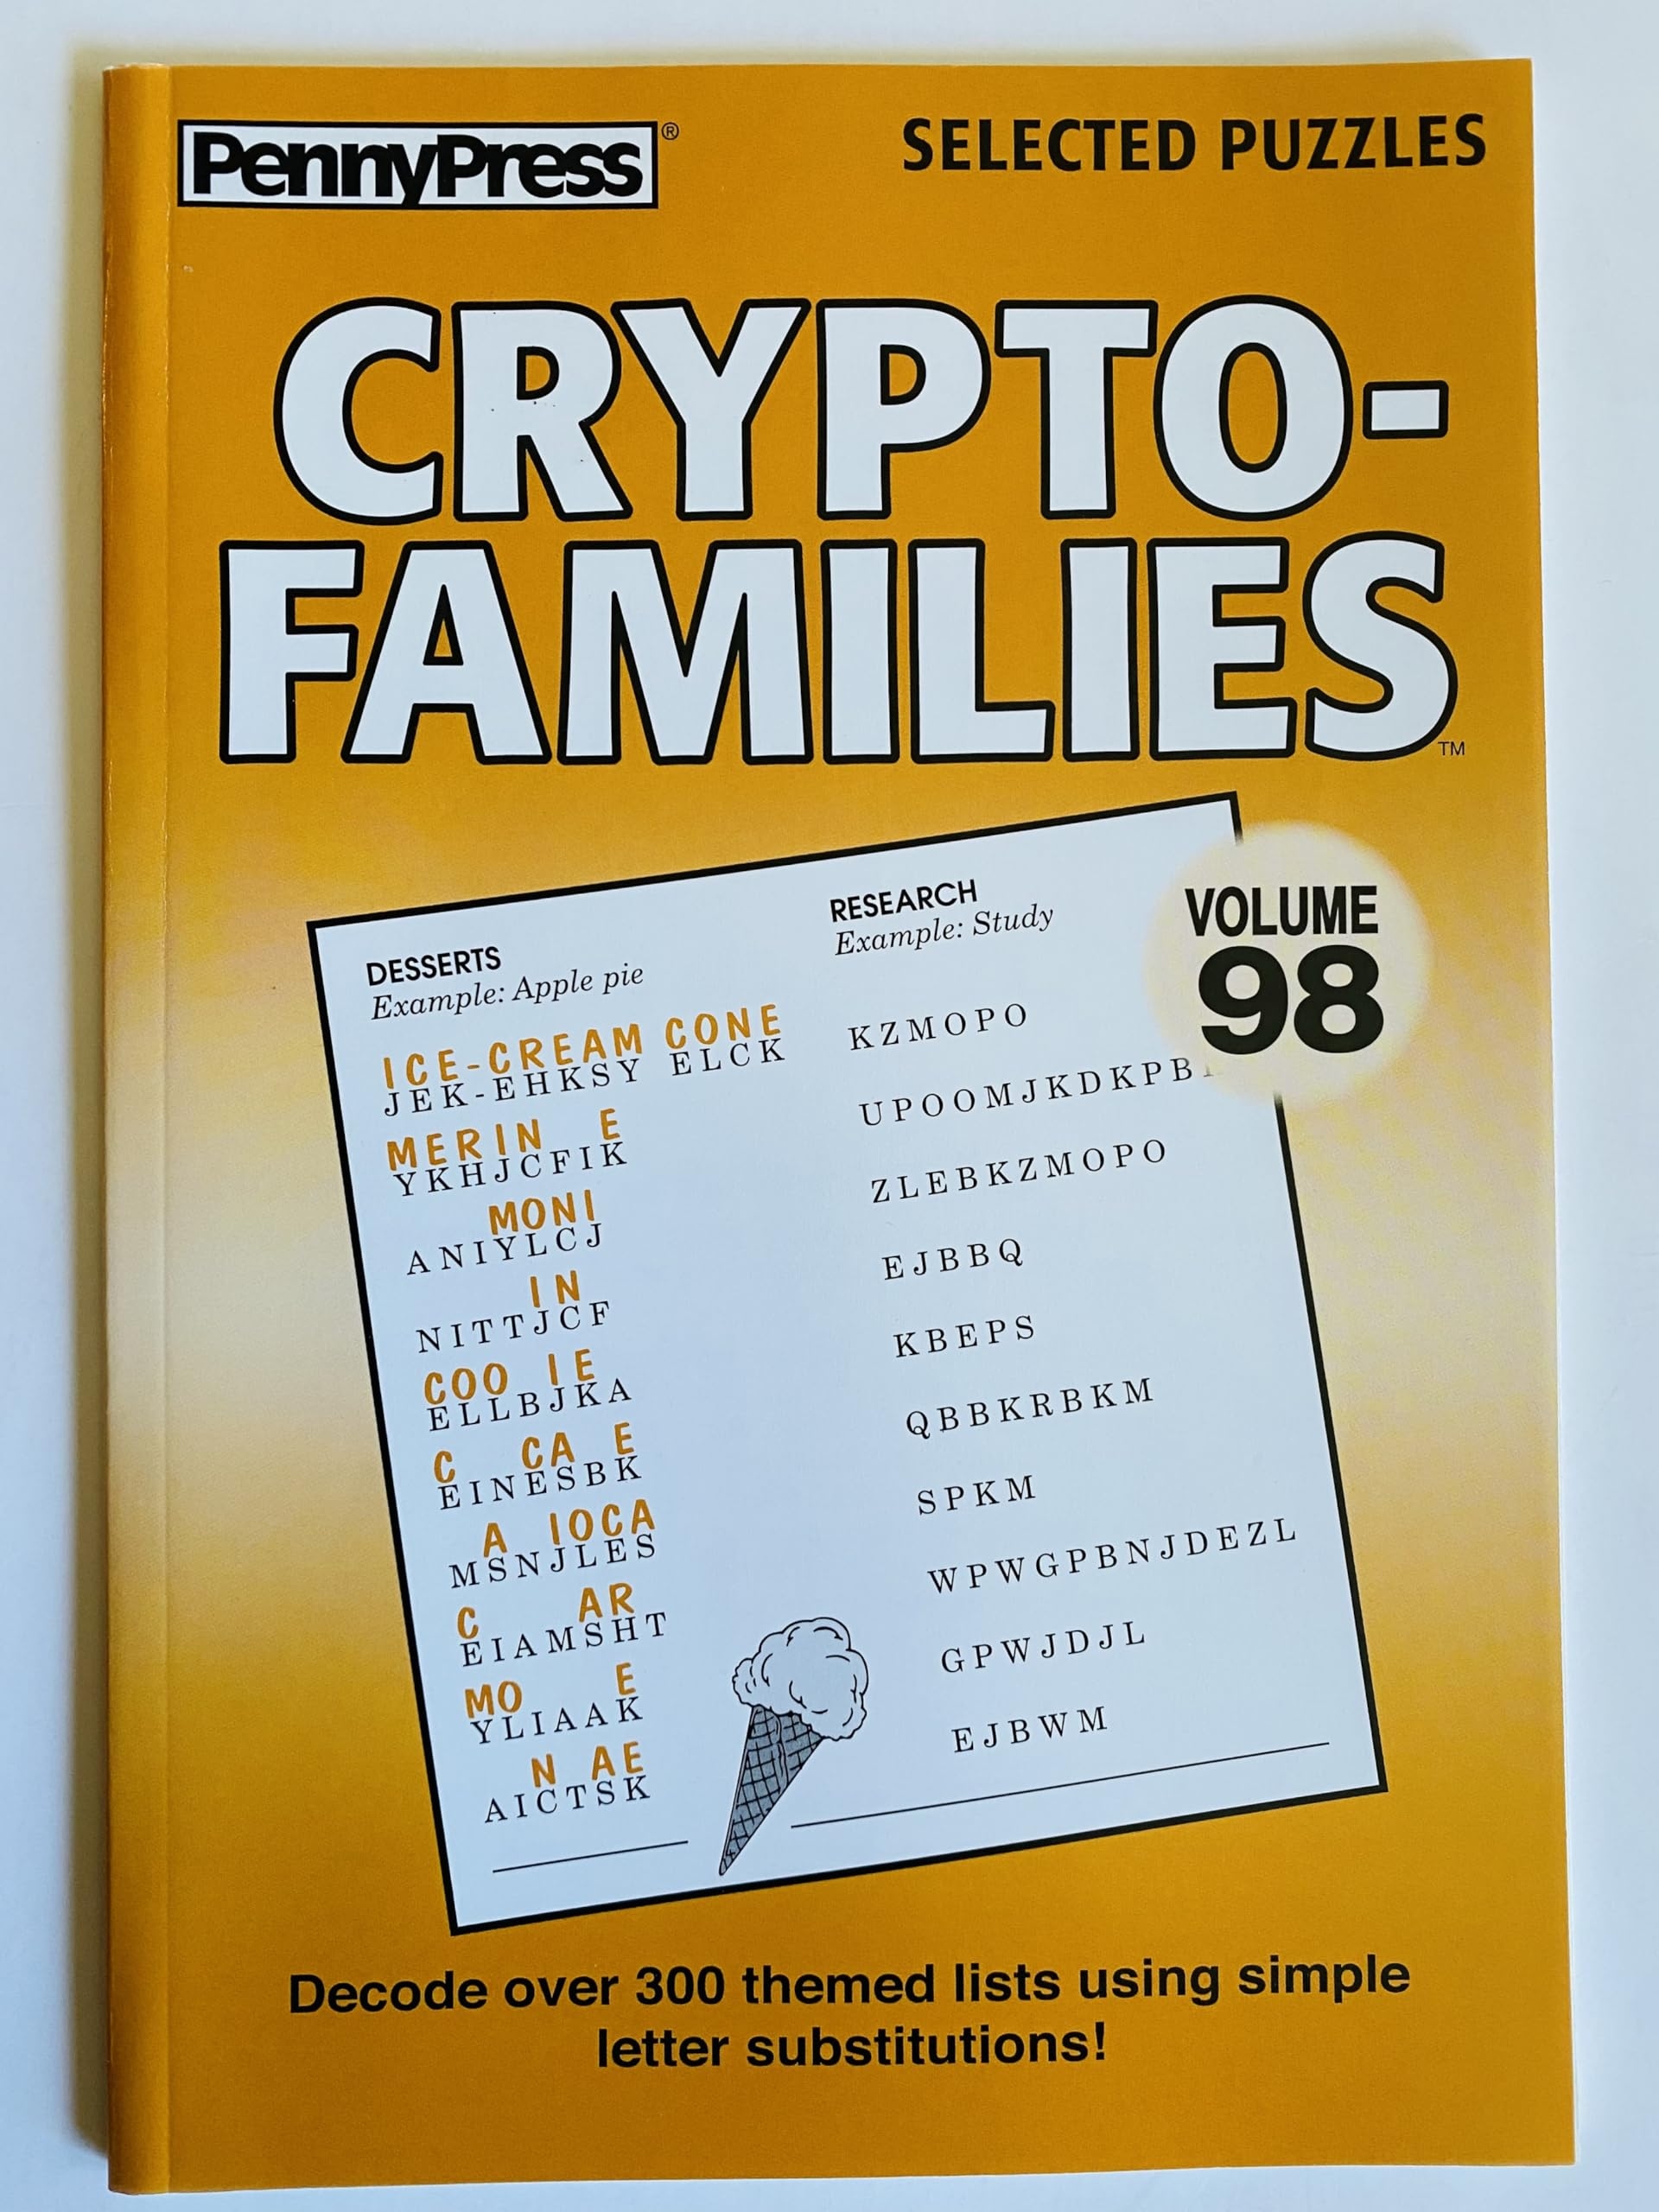 Amazon Volume 98 Of The Cryptofamilies From The Penny Press Selected Puzzles Series Crypto Families Everything Else